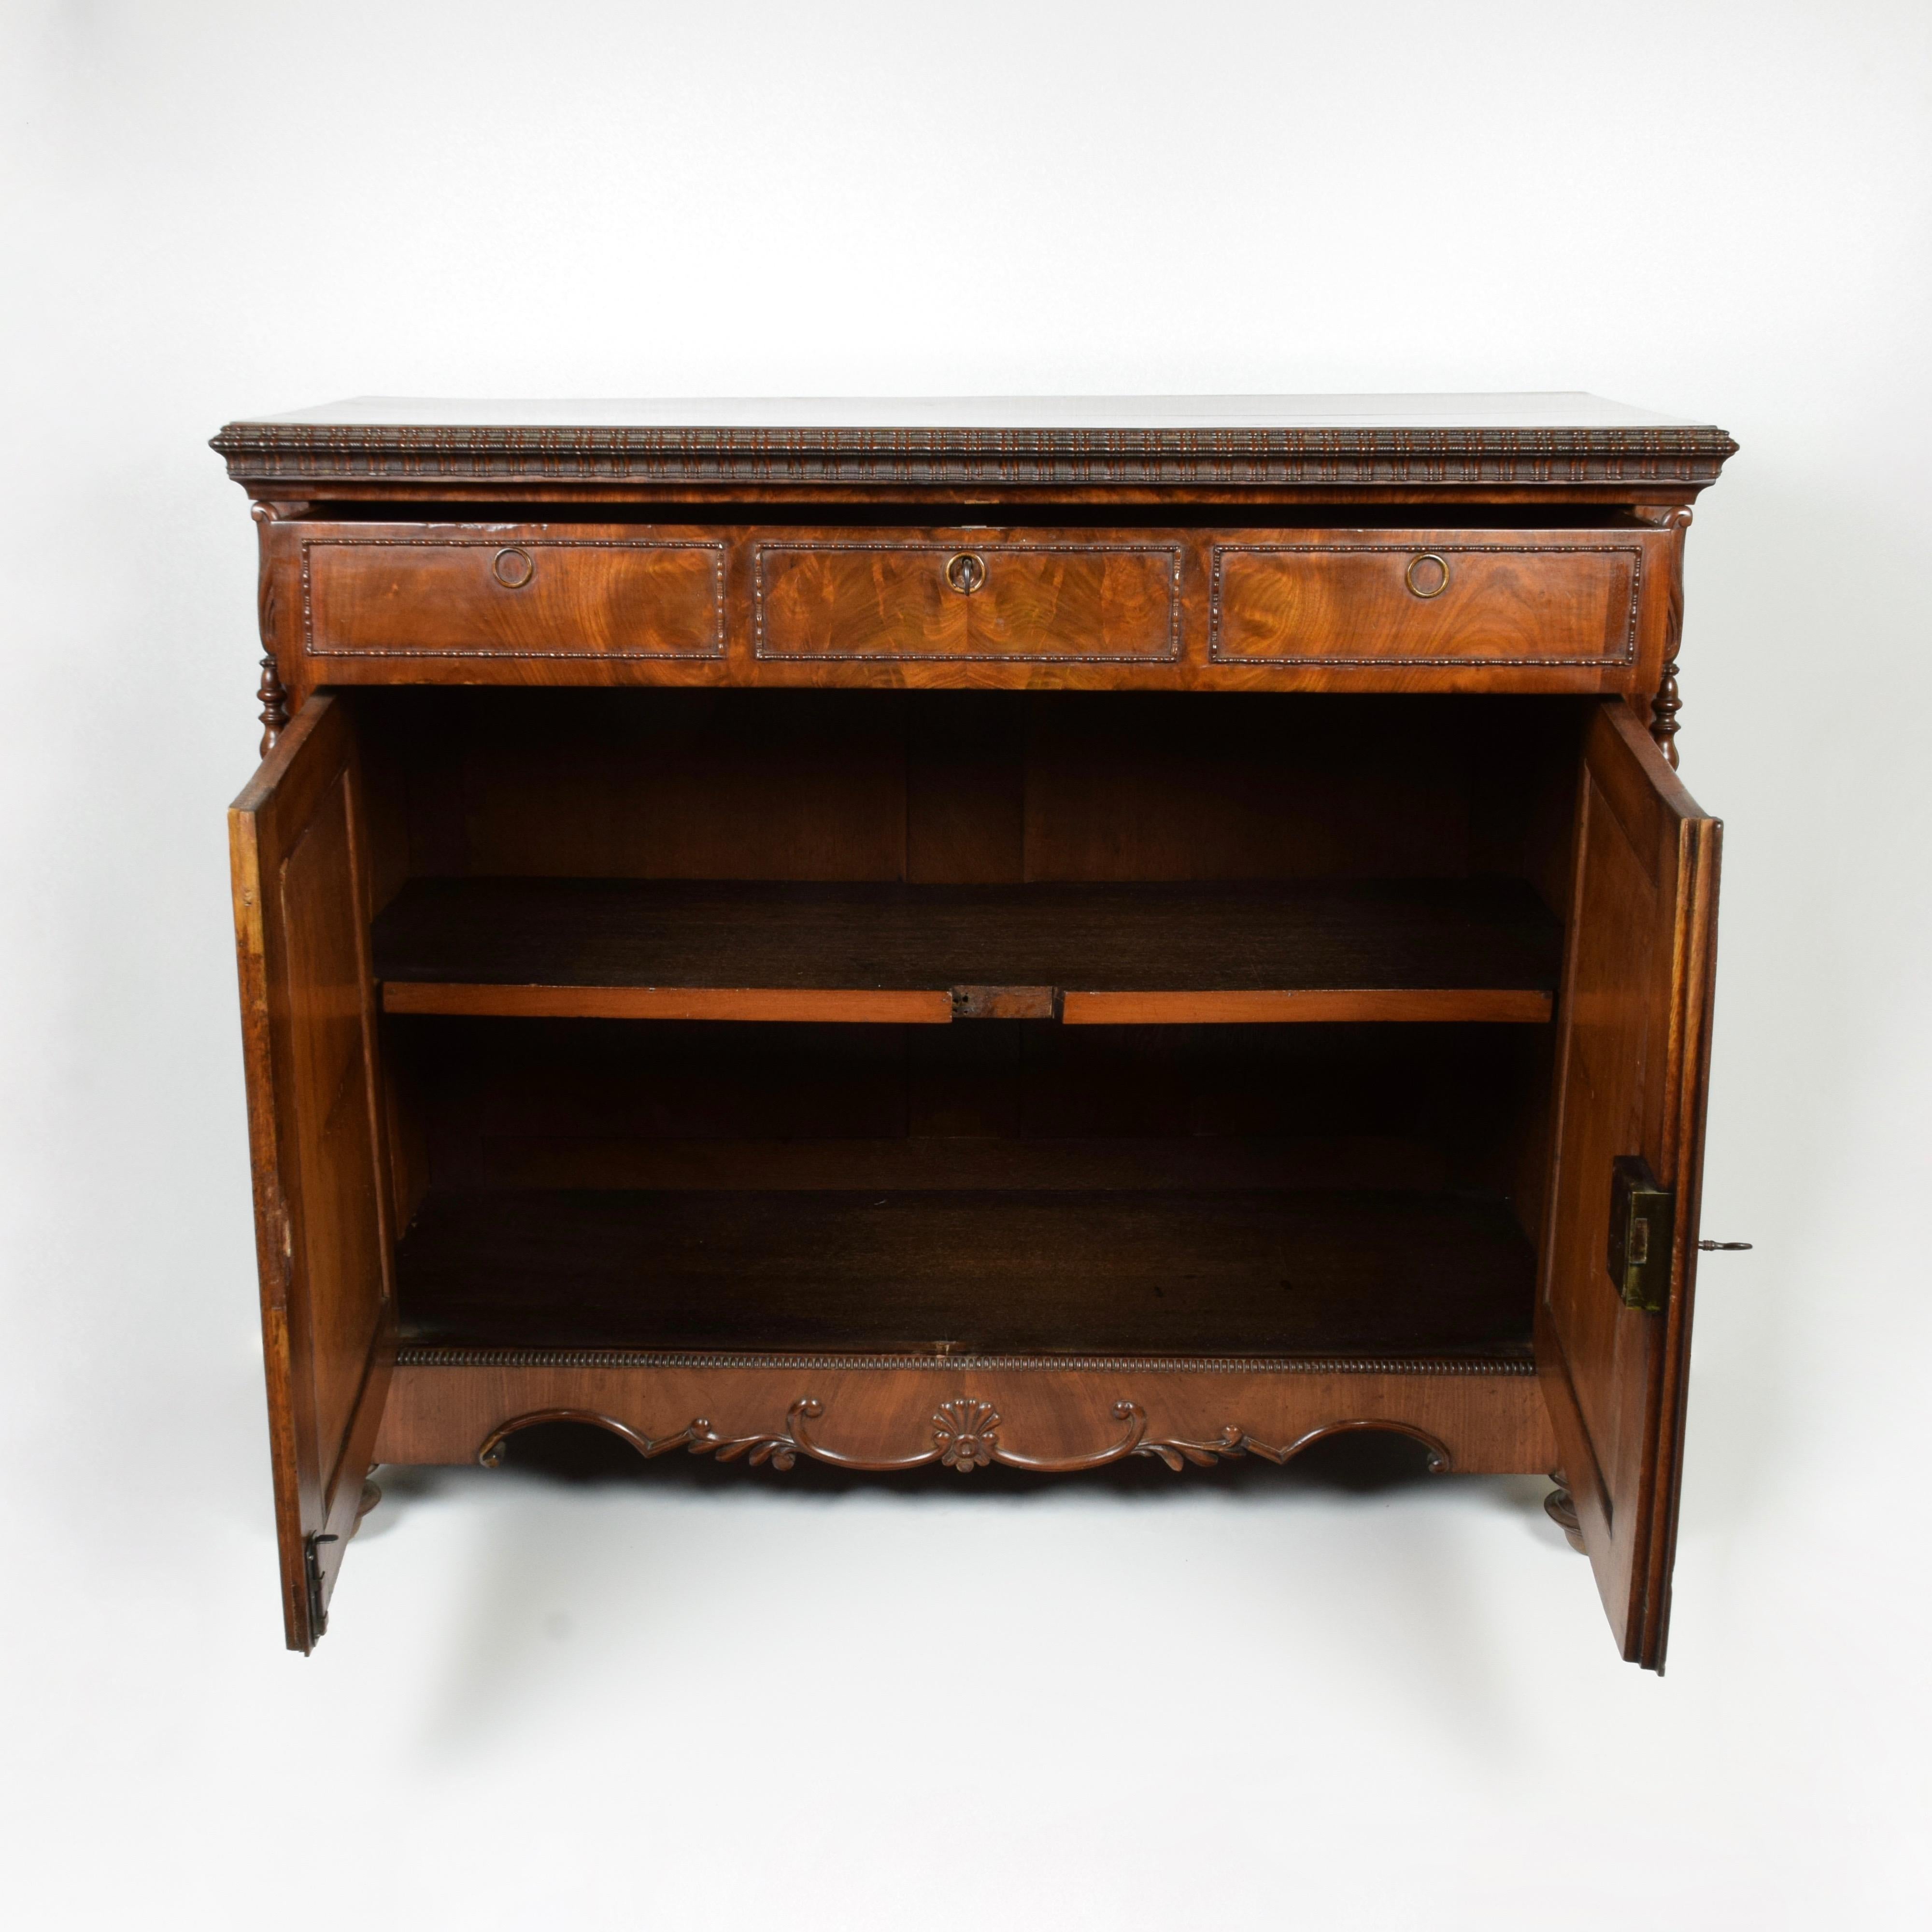 France, Louis Philippe, mid-19th century
in mahogany feather
Oak interior
Measurements: cm L 121 x D 47 x H 100
Good conditions.